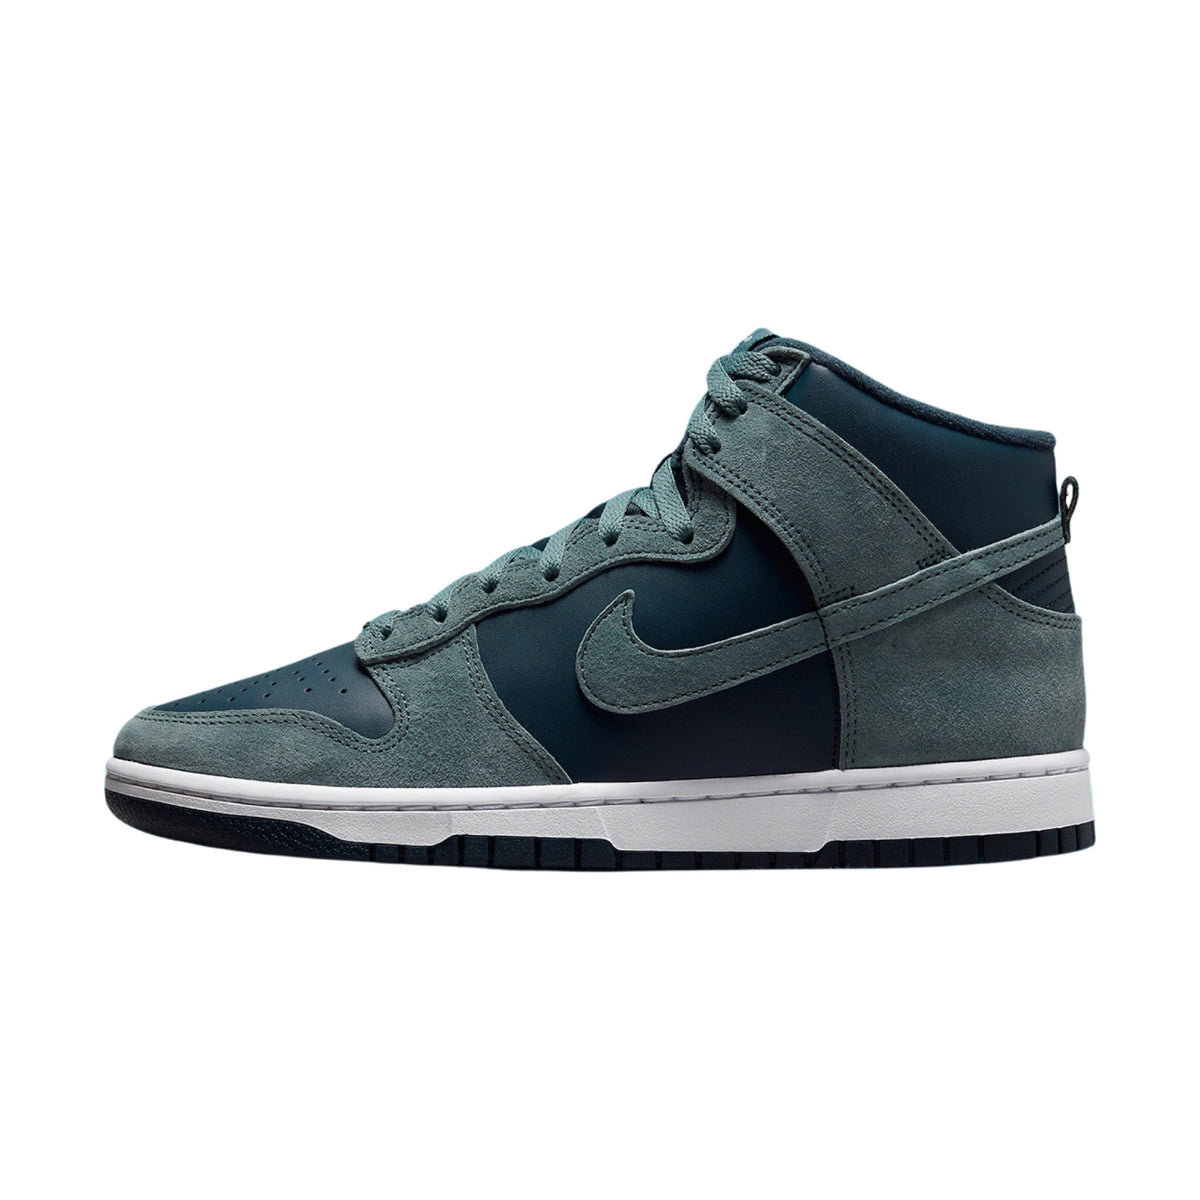 NIKE DUNK HIGH TEAL SUEDE